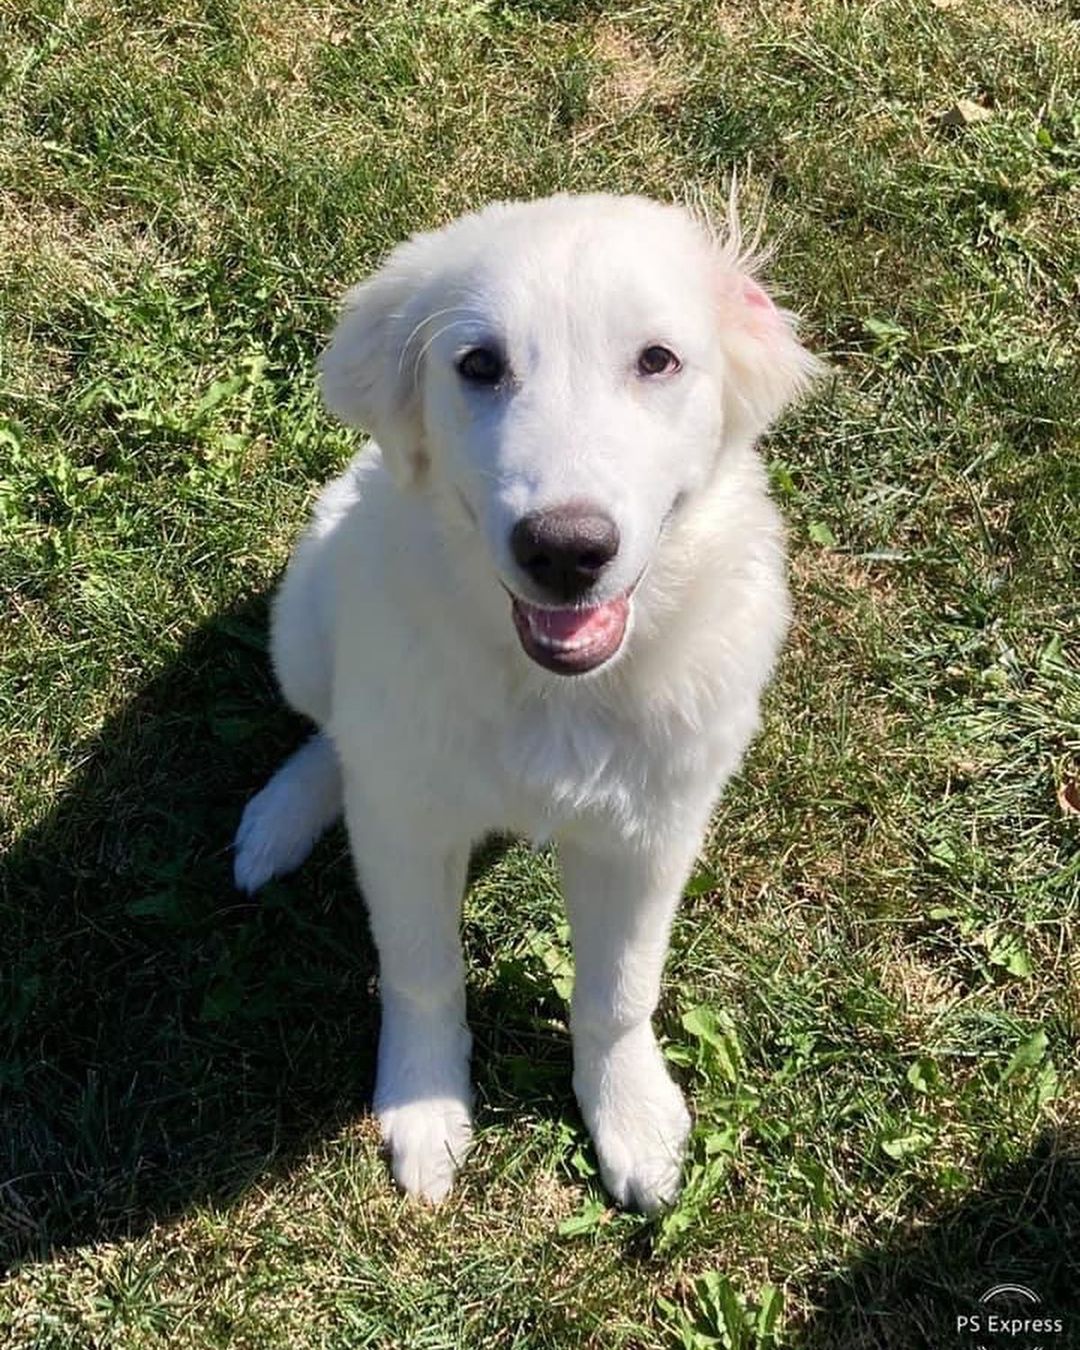 Star was surrendered to us with her sister Molly. Their owners  were expecting a new baby and had children ages 2 and 4 in the home that were afraid of big, playful puppies.

Star is a 4 month old Great Pyrenees mix and she’s going to be a big girl at already 45 lbs! Although she’s on the shy side and more independent than her sister, she enjoys meeting adults and children and the attention she receives. Star loves playing with her sister and the resident Rottweiler. We have not seen her around cats. When outside in the backyard, Star likes to hunt for sticks and chase grasshoppers. She also likes to chase tennis balls but don’t expect her to fetch the ball! Her foster mom says her favorite treats are stuffed Kongs and pig ears. Star sits on command, is doing well with house training, and we are working on leash training. ￼
*Being fostered in Blue Springs, MO*

Star and her sister Molly will be adopted to separate homes. They are up to date on vaccines, microchipped, and up to date on heartworm and flea/tick preventatives. Our puppies are adopted on a spay/neuter contract with adopter promising to spay/neuter at a later date and must show proof at that time. 

Adoption requirements for Star: You must have a secure and visible fence, pass a home check and a vet check with at least a two year, excellent vet history. Star can be adopted in Missouri, Illinois, Iowa, Nebraska, Kansas, and Arkansas. Apply for Star at www.gprescue.com/current-adoptables
🐾

<a target='_blank' href='https://www.instagram.com/explore/tags/greatPyrenees/'>#greatPyrenees</a> <a target='_blank' href='https://www.instagram.com/explore/tags/greatpyreneesofthehour/'>#greatpyreneesofthehour</a> <a target='_blank' href='https://www.instagram.com/explore/tags/greatpyreneesoftheday/'>#greatpyreneesoftheday</a> <a target='_blank' href='https://www.instagram.com/explore/tags/greatpyreneesfeature/'>#greatpyreneesfeature</a> <a target='_blank' href='https://www.instagram.com/explore/tags/greatpyrfeature/'>#greatpyrfeature</a> <a target='_blank' href='https://www.instagram.com/explore/tags/dogstagram/'>#dogstagram</a> <a target='_blank' href='https://www.instagram.com/explore/tags/dogoftheday/'>#dogoftheday</a> <a target='_blank' href='https://www.instagram.com/explore/tags/dogsofinsta/'>#dogsofinsta</a> <a target='_blank' href='https://www.instagram.com/explore/tags/petsofinstagram/'>#petsofinstagram</a> <a target='_blank' href='https://www.instagram.com/explore/tags/petstagram/'>#petstagram</a> <a target='_blank' href='https://www.instagram.com/explore/tags/polarbeardog/'>#polarbeardog</a> <a target='_blank' href='https://www.instagram.com/explore/tags/giantdogsofinstagram/'>#giantdogsofinstagram</a> <a target='_blank' href='https://www.instagram.com/explore/tags/giantbreedlovers/'>#giantbreedlovers</a> <a target='_blank' href='https://www.instagram.com/explore/tags/adoptdontshop/'>#adoptdontshop</a> <a target='_blank' href='https://www.instagram.com/explore/tags/dogsofmo/'>#dogsofmo</a> <a target='_blank' href='https://www.instagram.com/explore/tags/adopt/'>#adopt</a> <a target='_blank' href='https://www.instagram.com/explore/tags/foster/'>#foster</a> <a target='_blank' href='https://www.instagram.com/explore/tags/greatpyreneesrescueofmissouri/'>#greatpyreneesrescueofmissouri</a> <a target='_blank' href='https://www.instagram.com/explore/tags/greatpyreneesrescueofmo/'>#greatpyreneesrescueofmo</a>